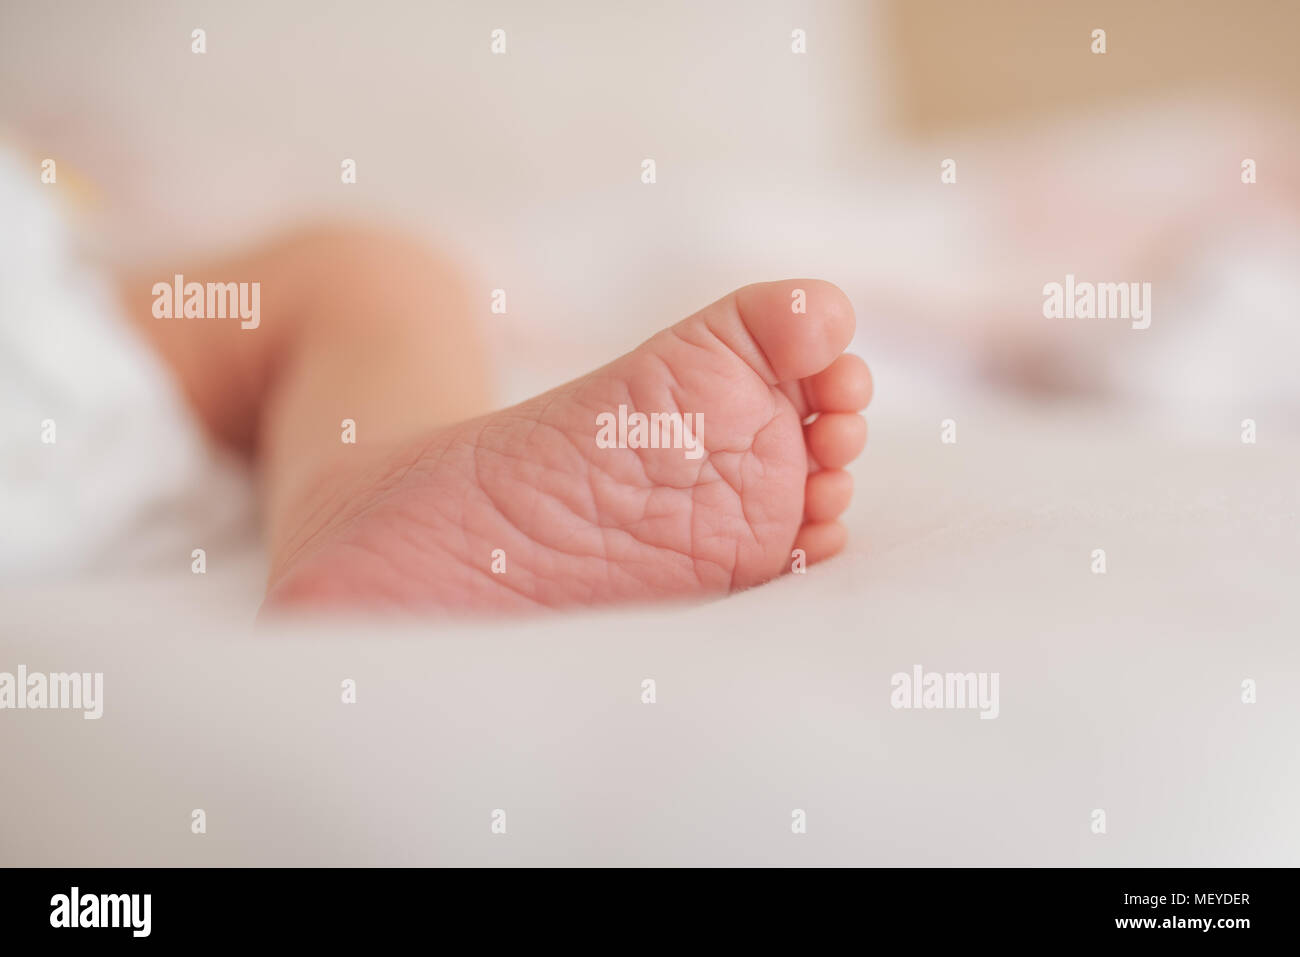 Foot of newborn baby. Skin care concept. Stock Photo